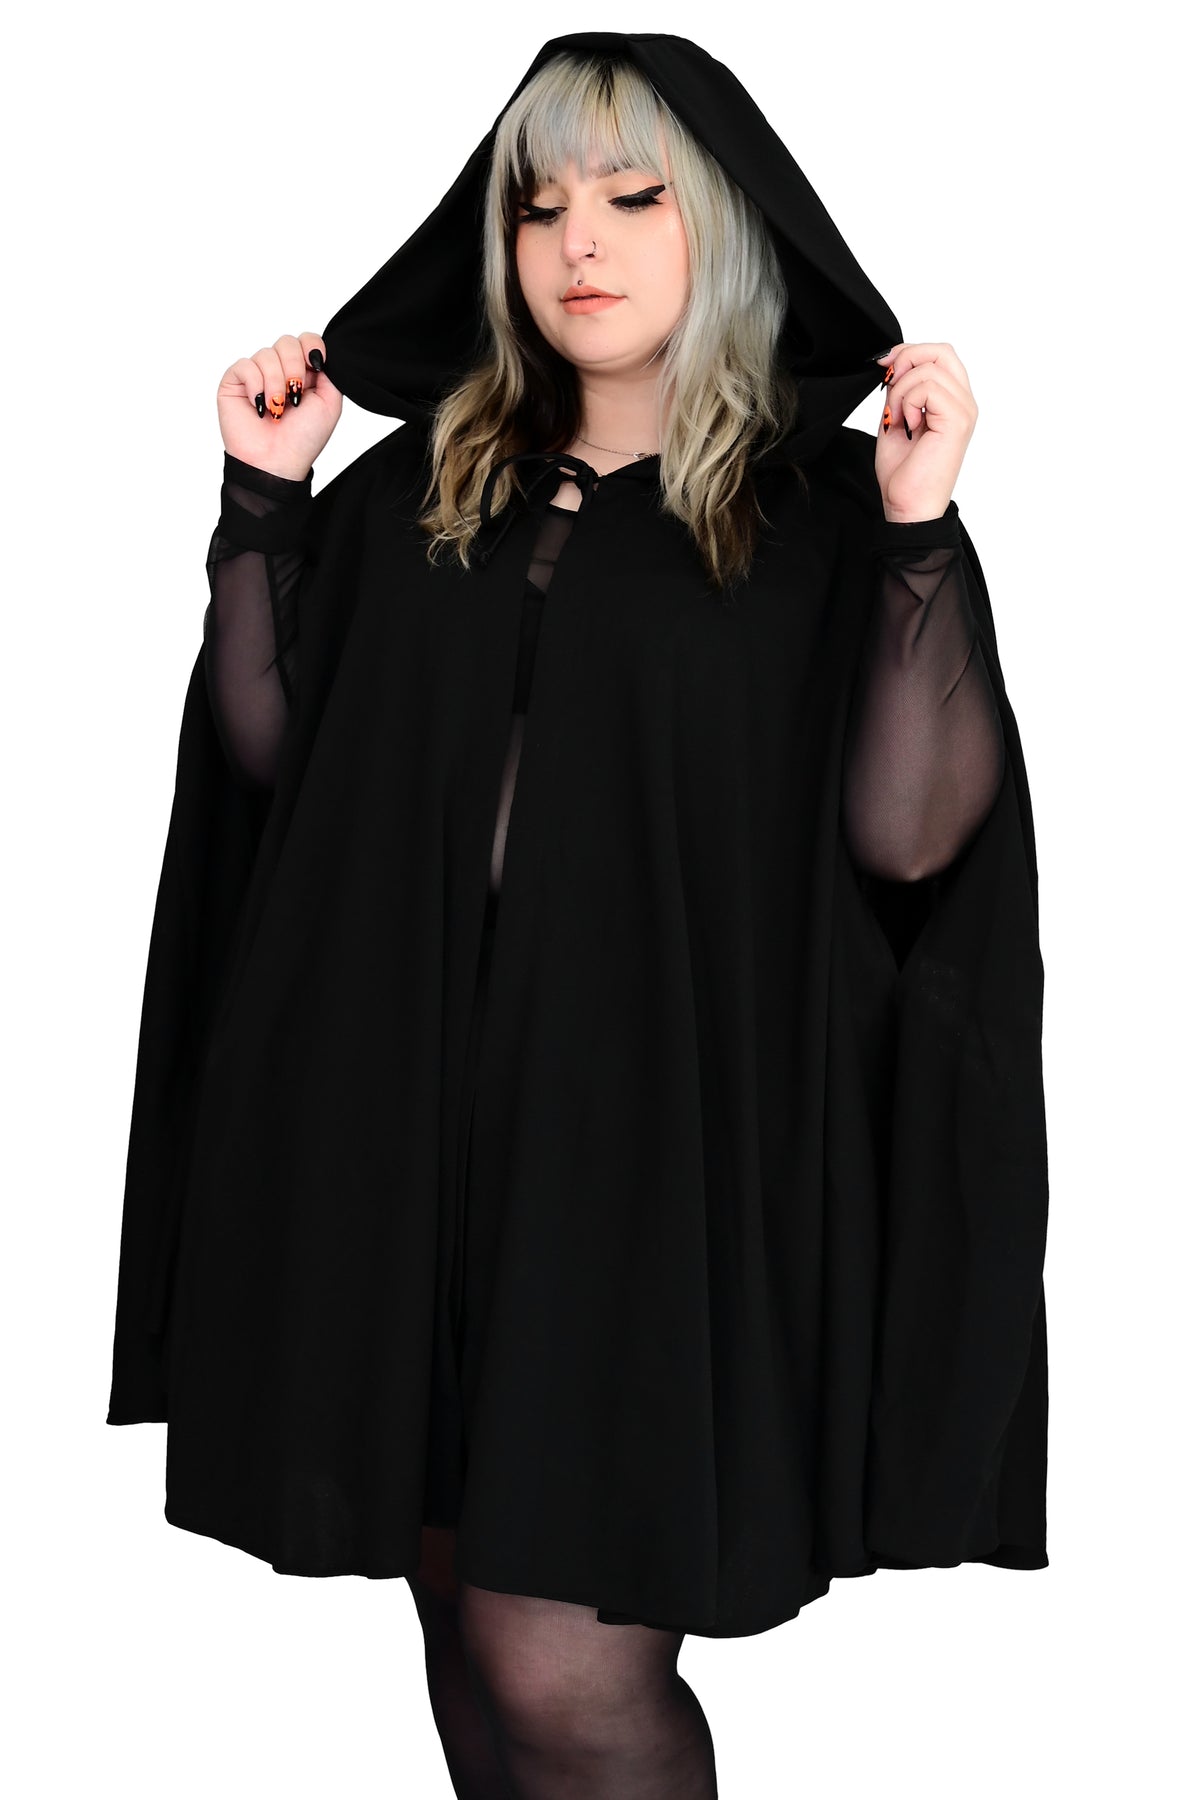 Over Sized Hooded Cape for your Sanderson Sisters Halloween Costume